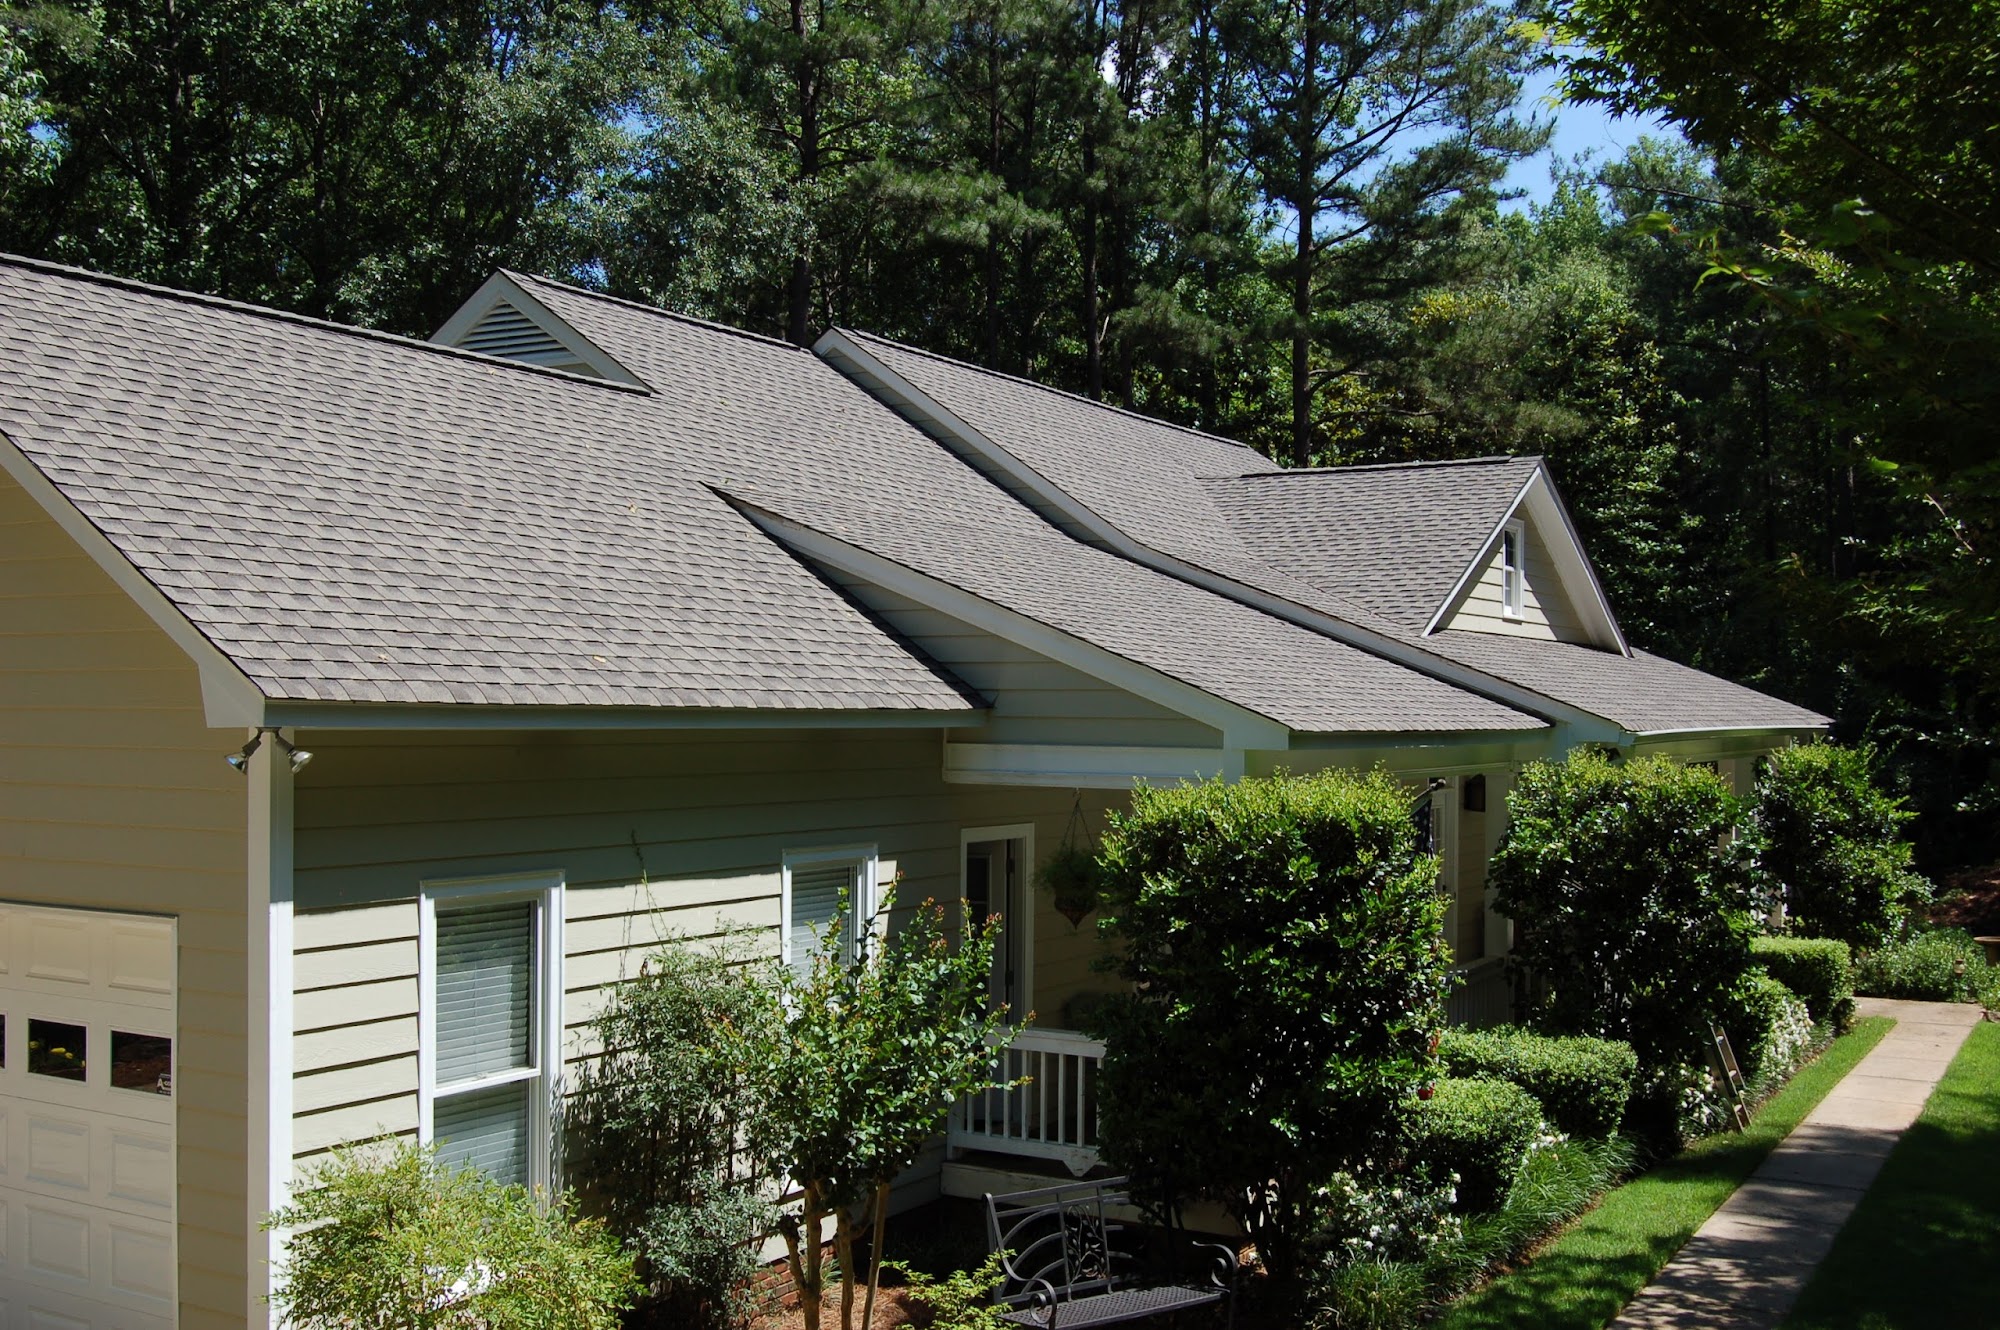 Westbrook Roofing and Remodeling